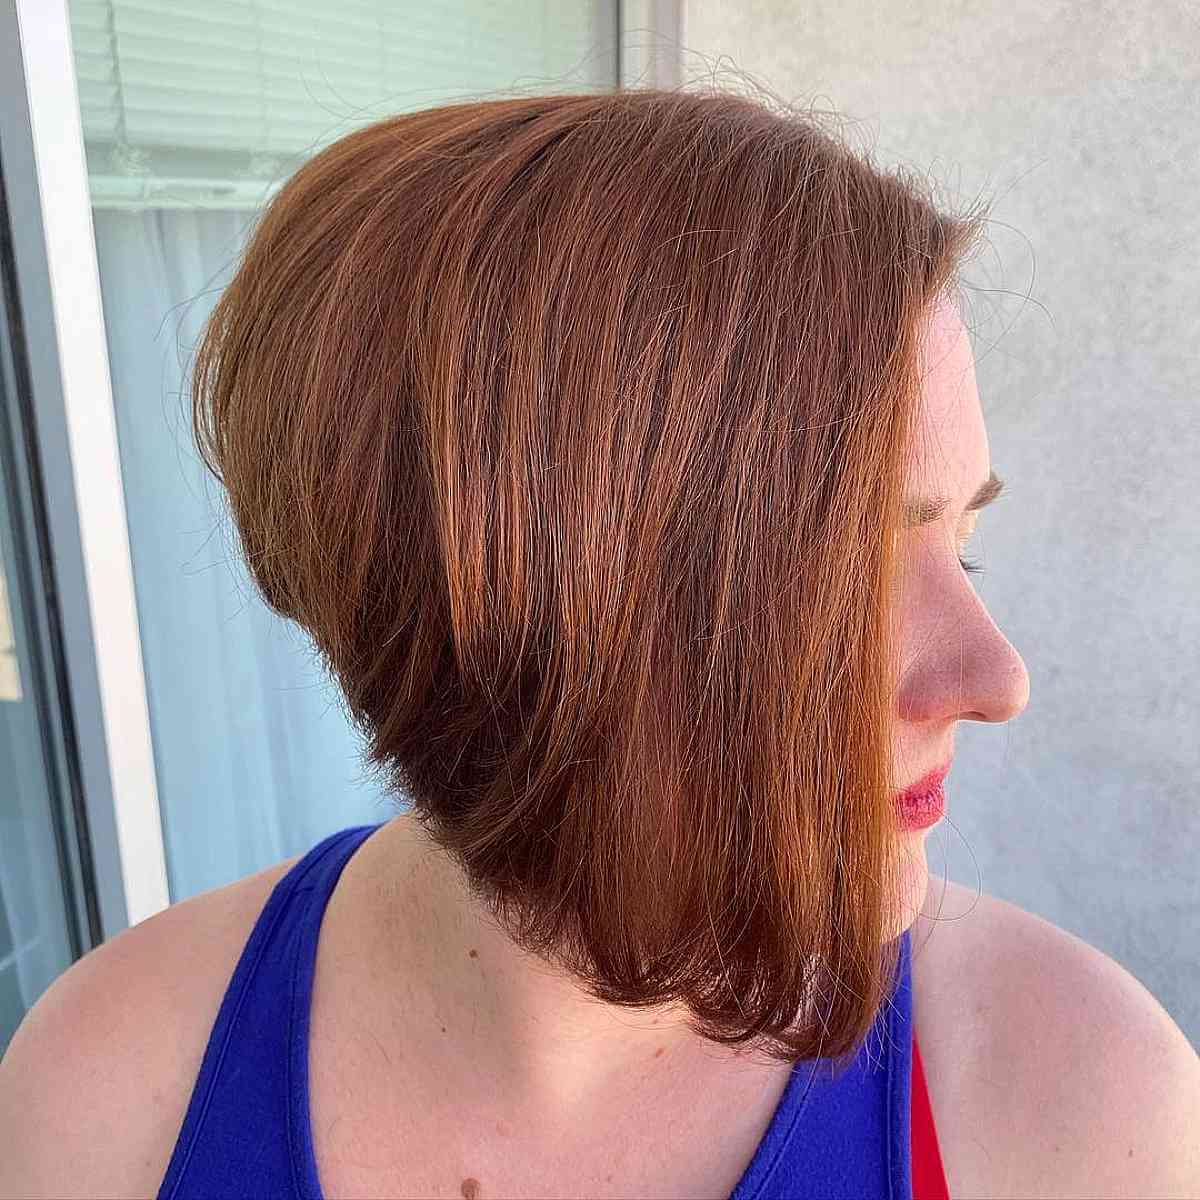 Chin-Length A-Line Bob That is Low-Maintenance